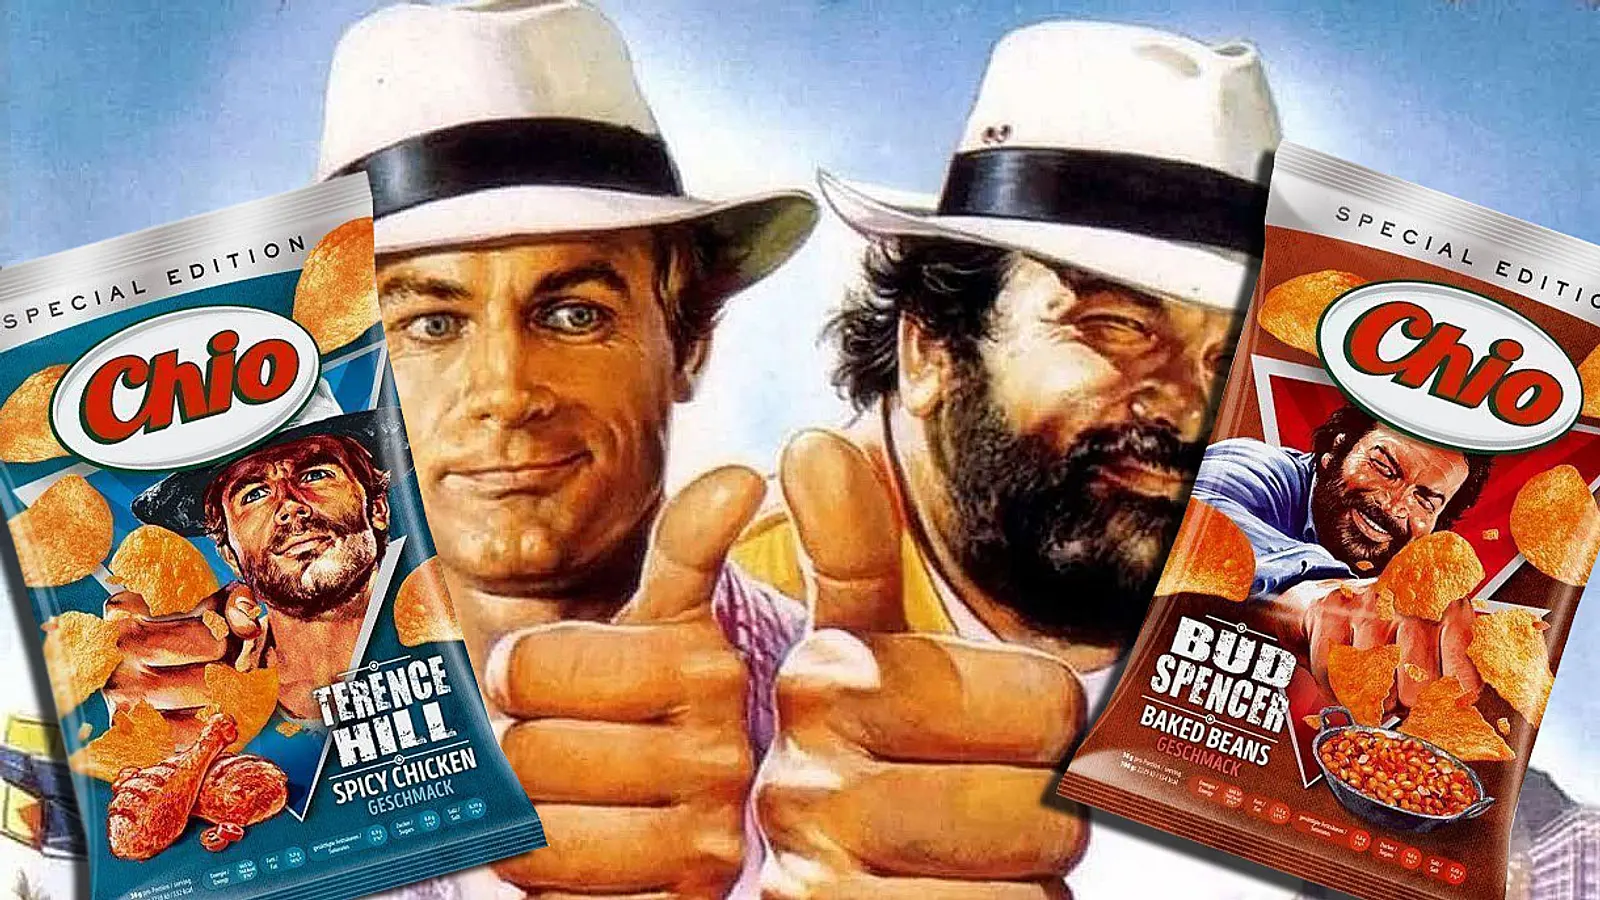 Bud Spencer & Terence Hill Special-Edition von Chio-Chips – Datistics